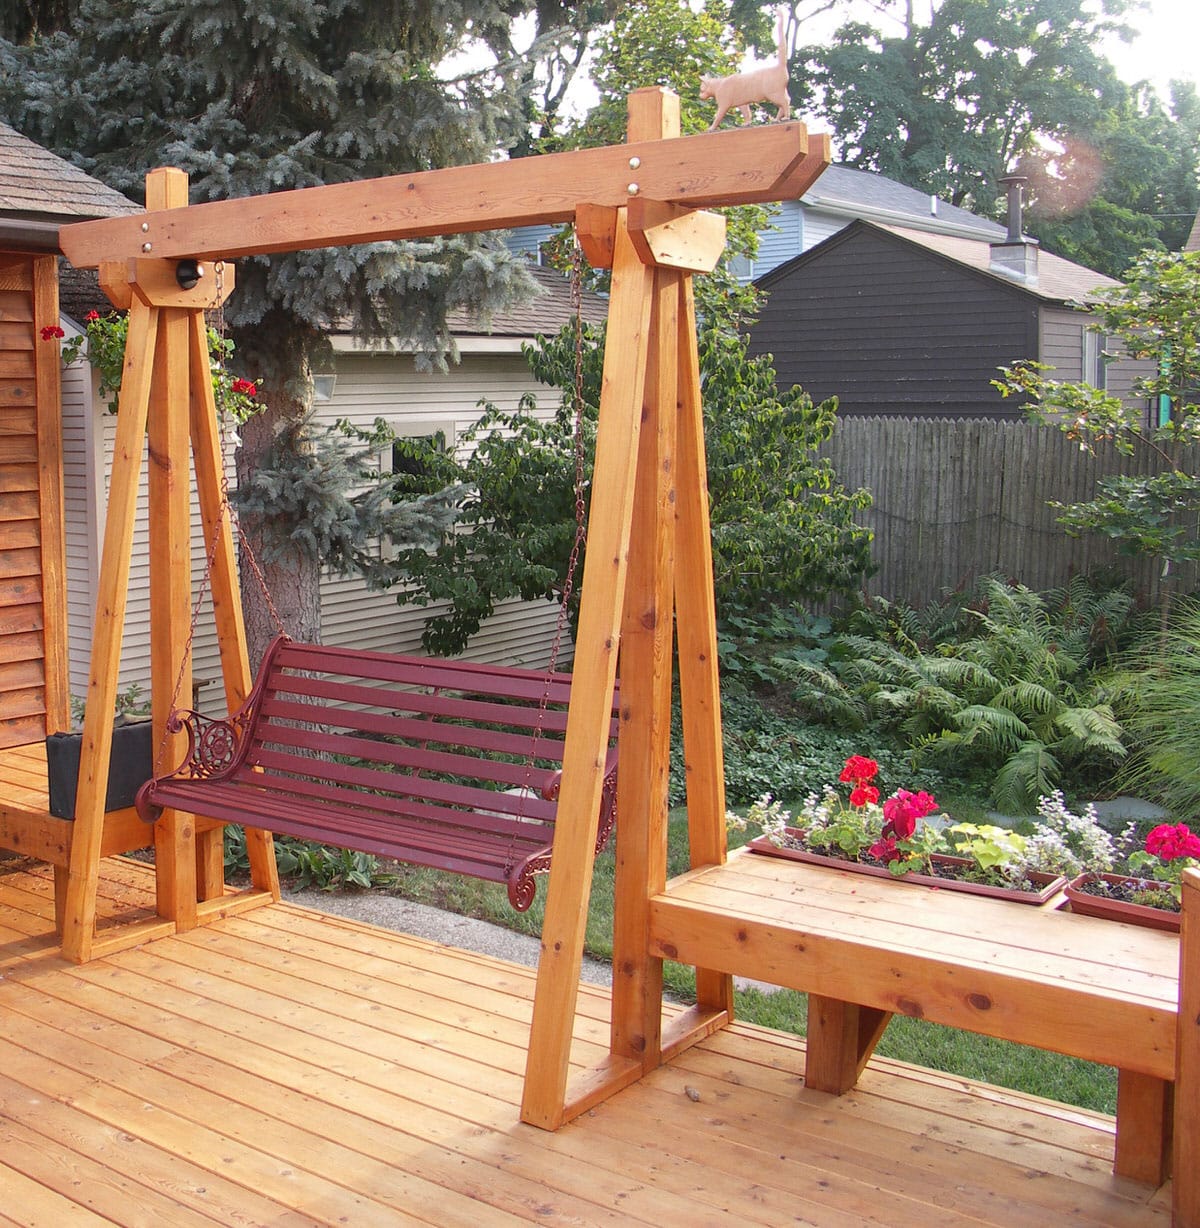 Custom deck contractor project from Precision Decks & Sunrooms. A deck featuring a wooden swing love seat.